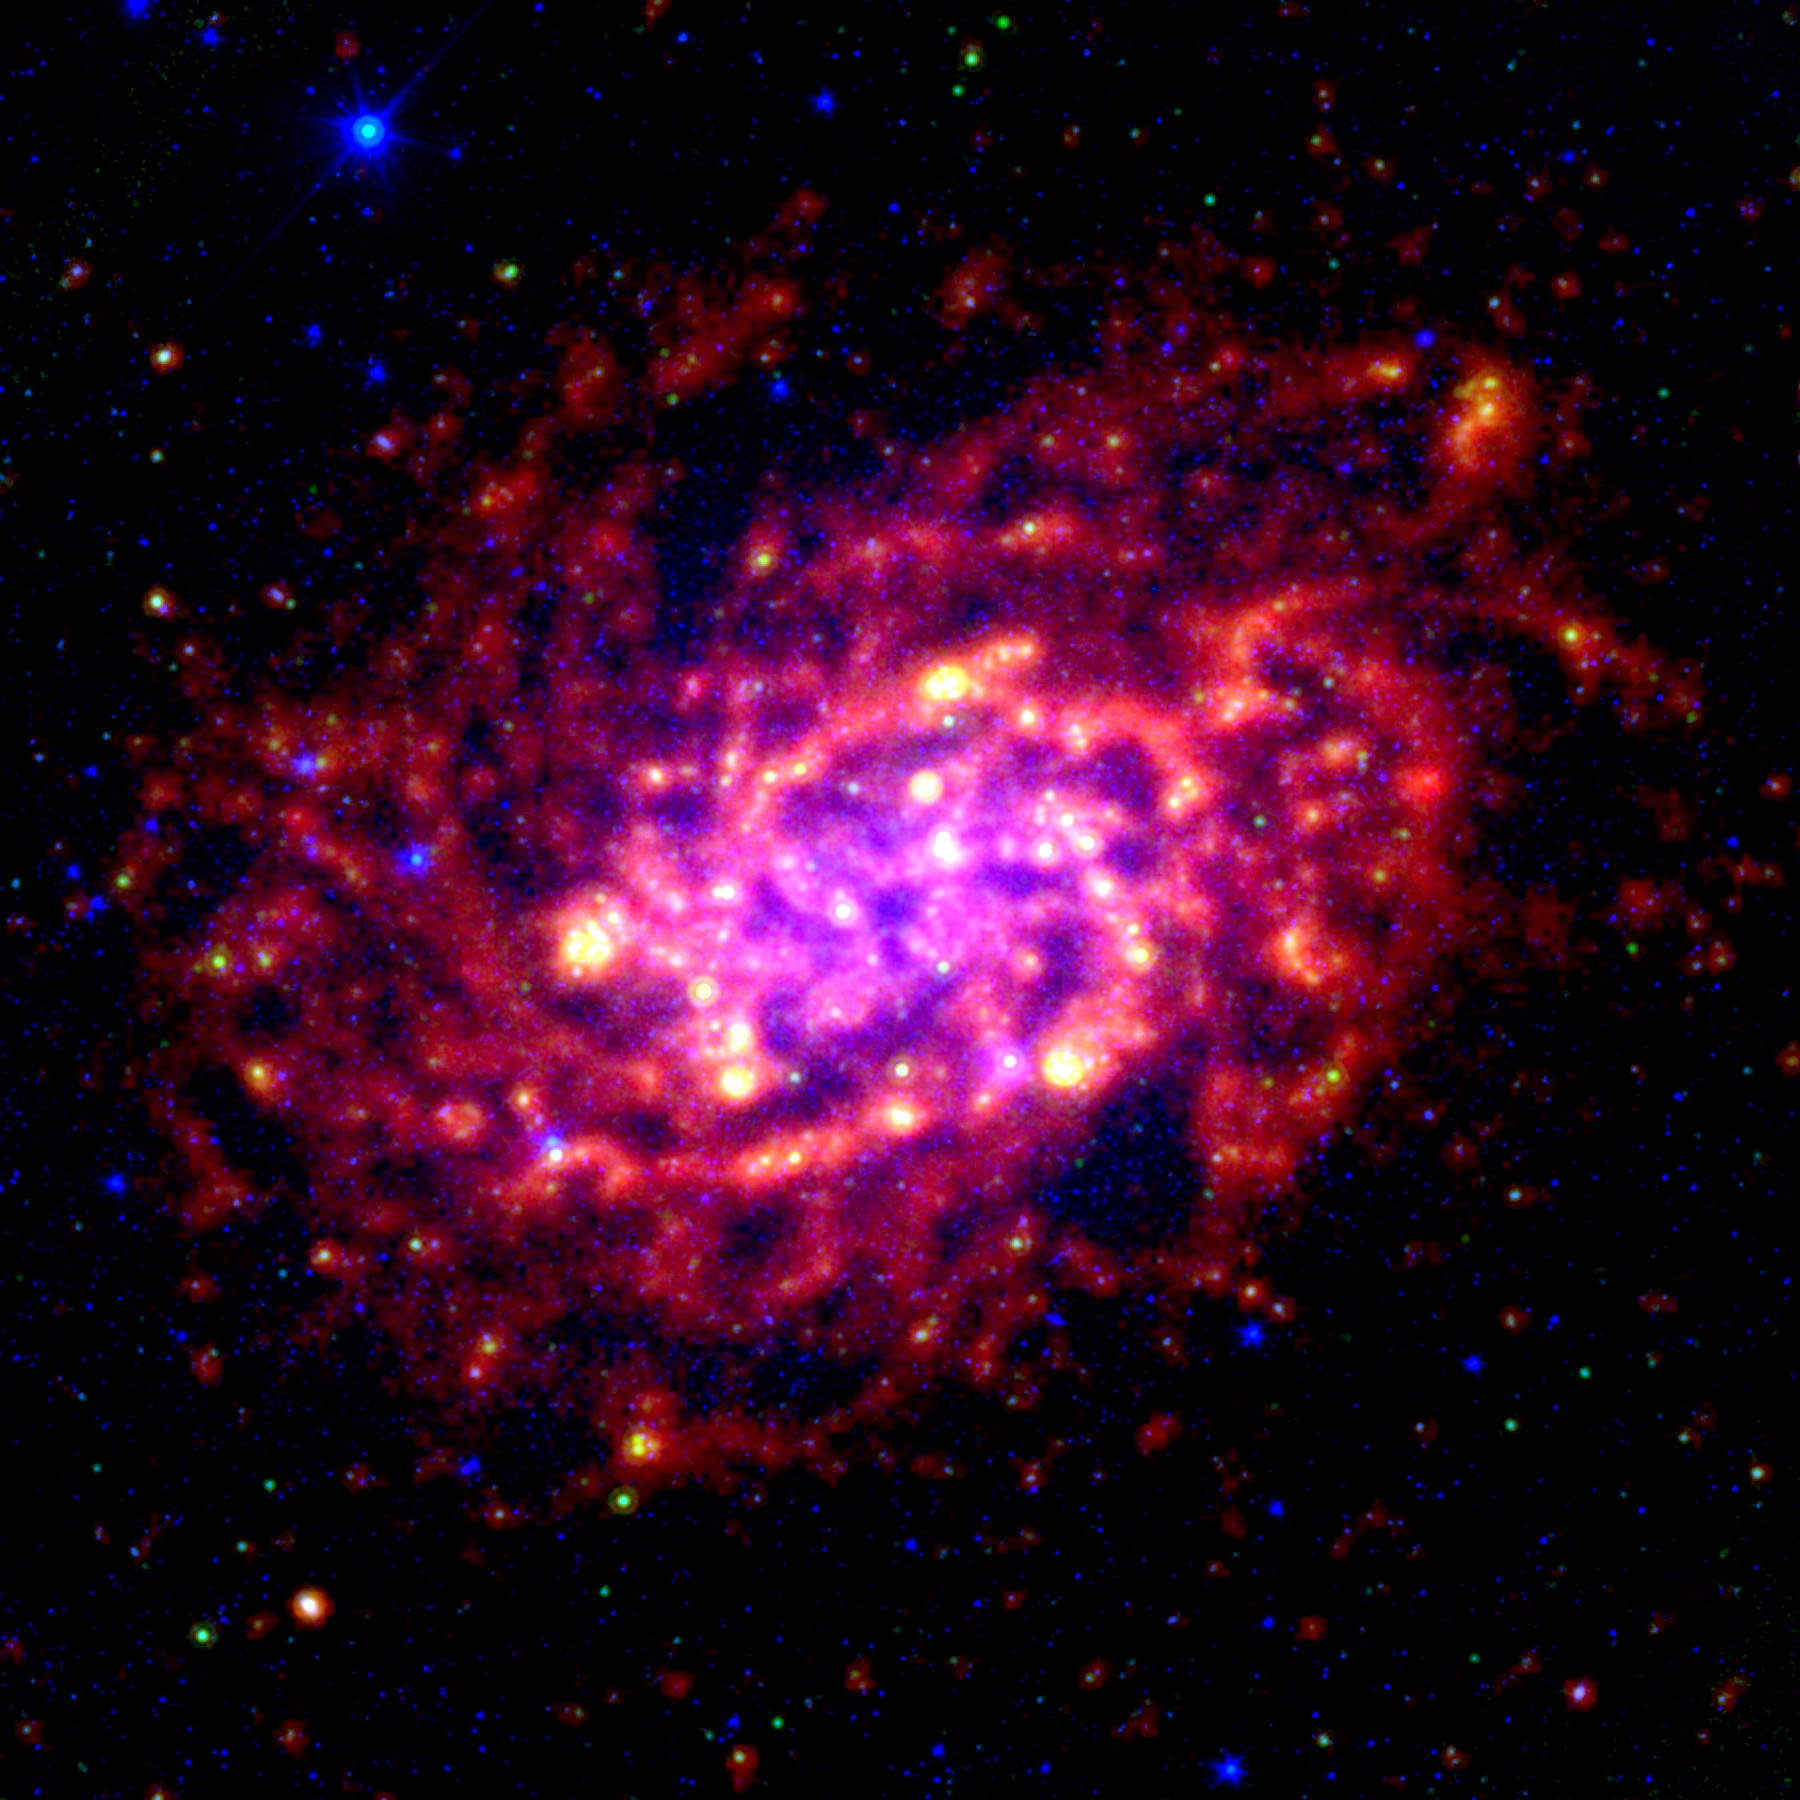 NGC 300 as seen in infrared emission